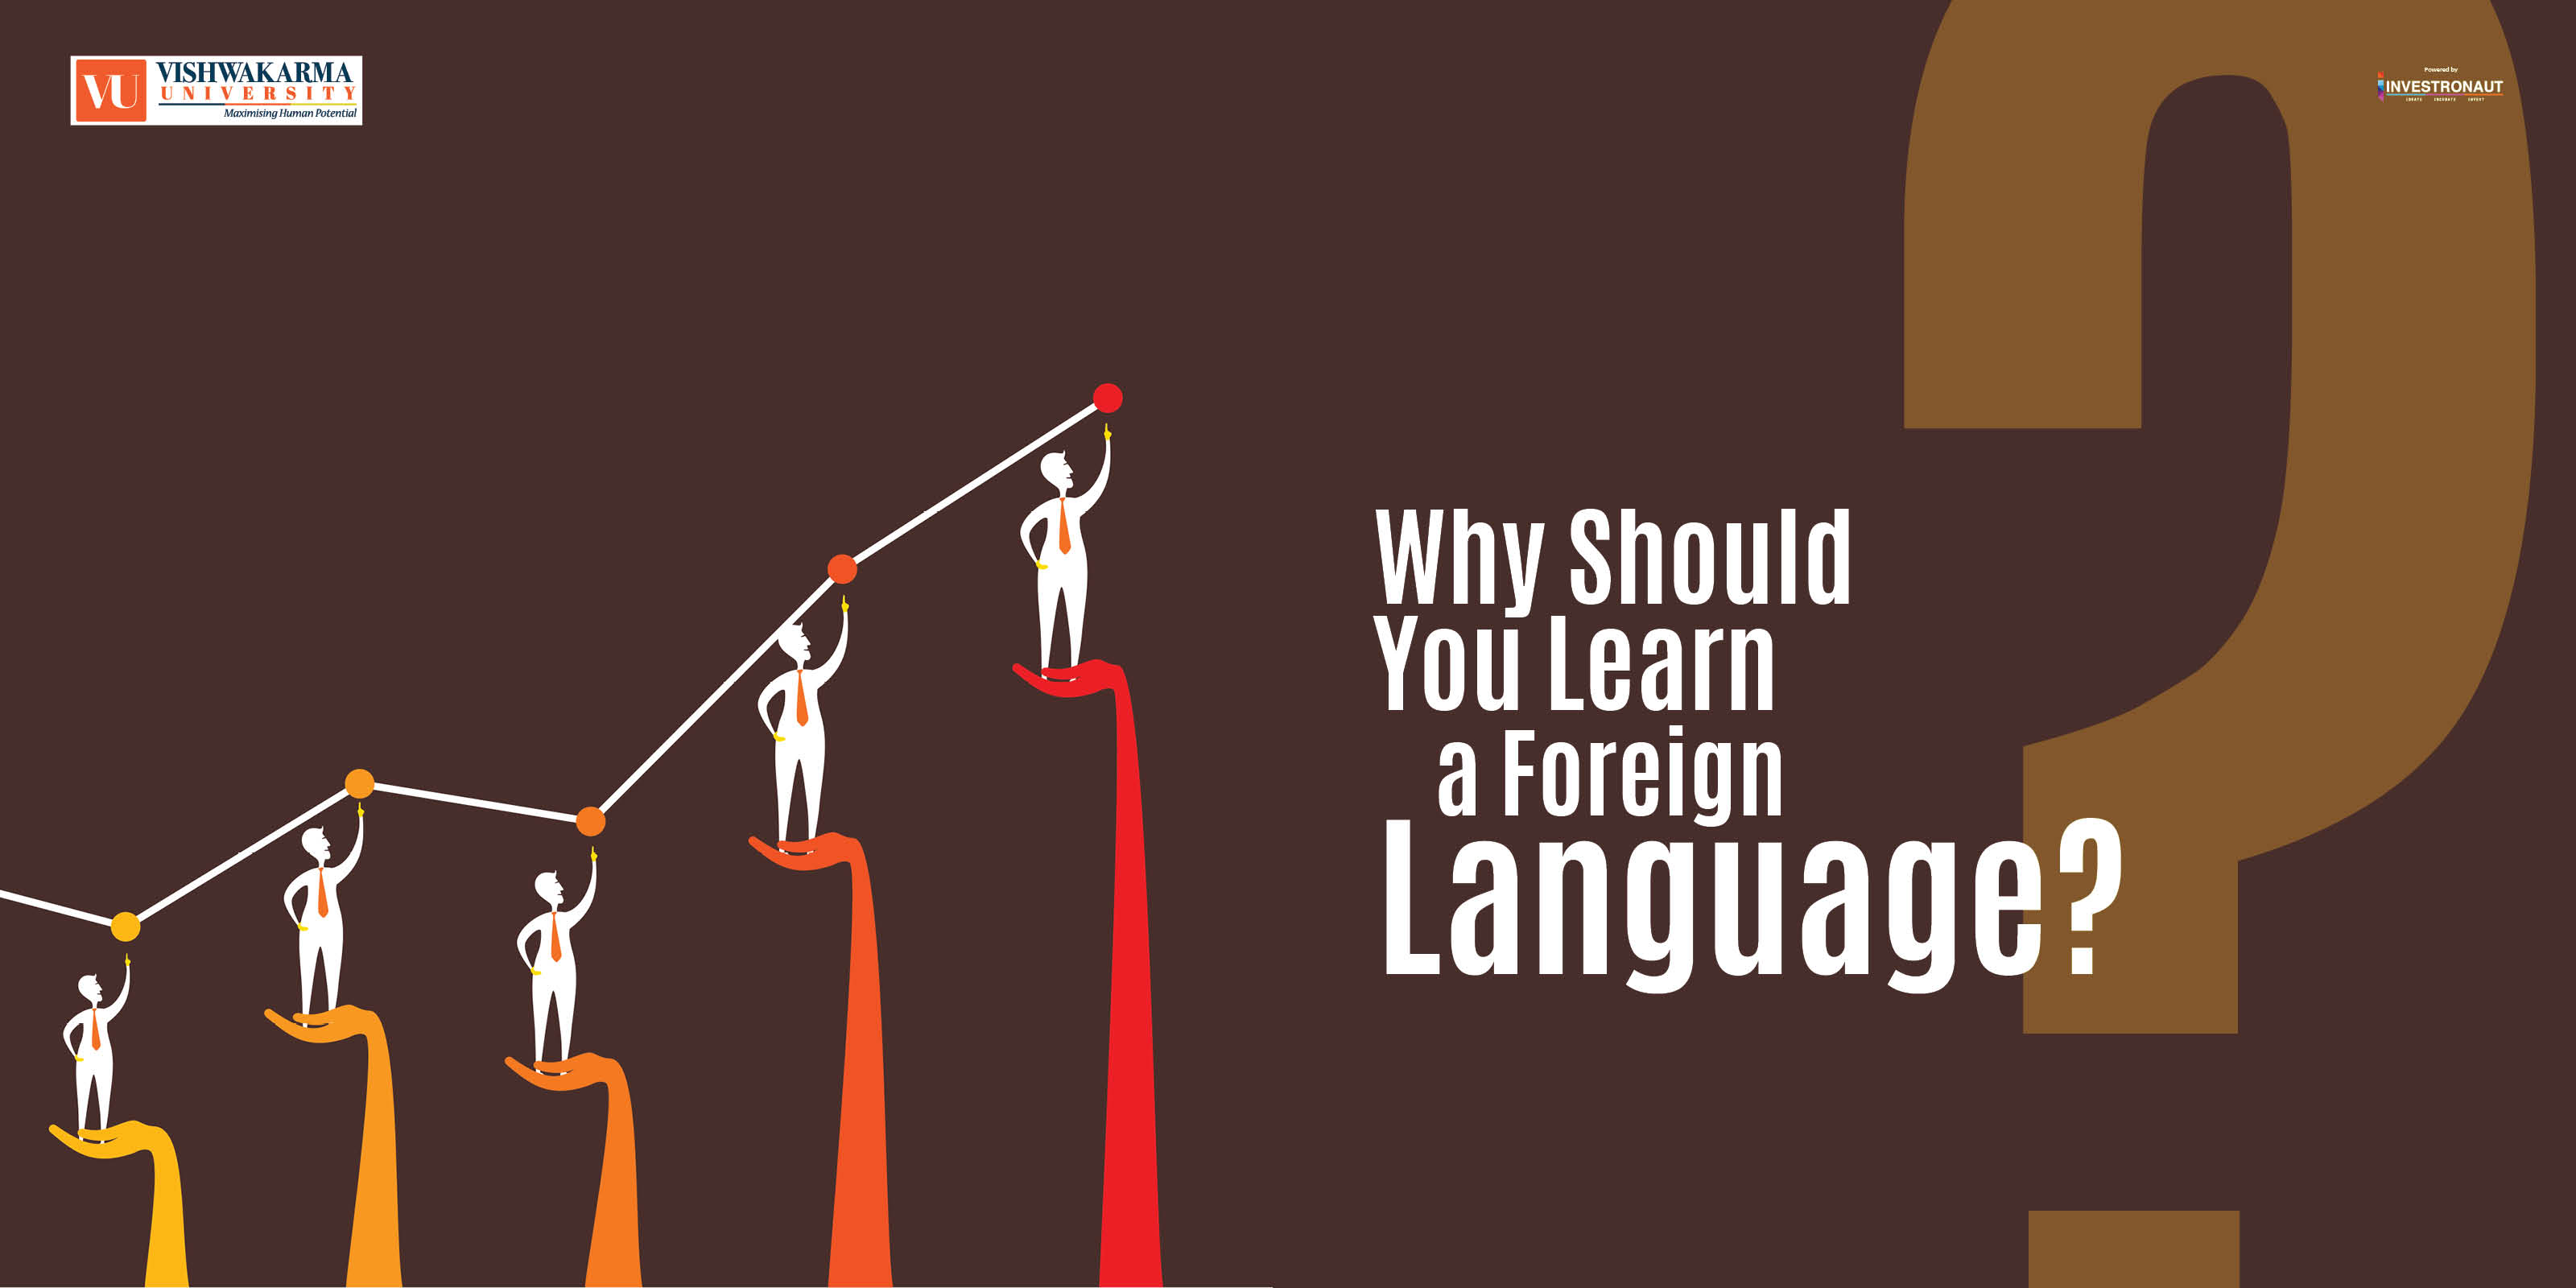 Learn_a_Foreign_Language_Article_Image